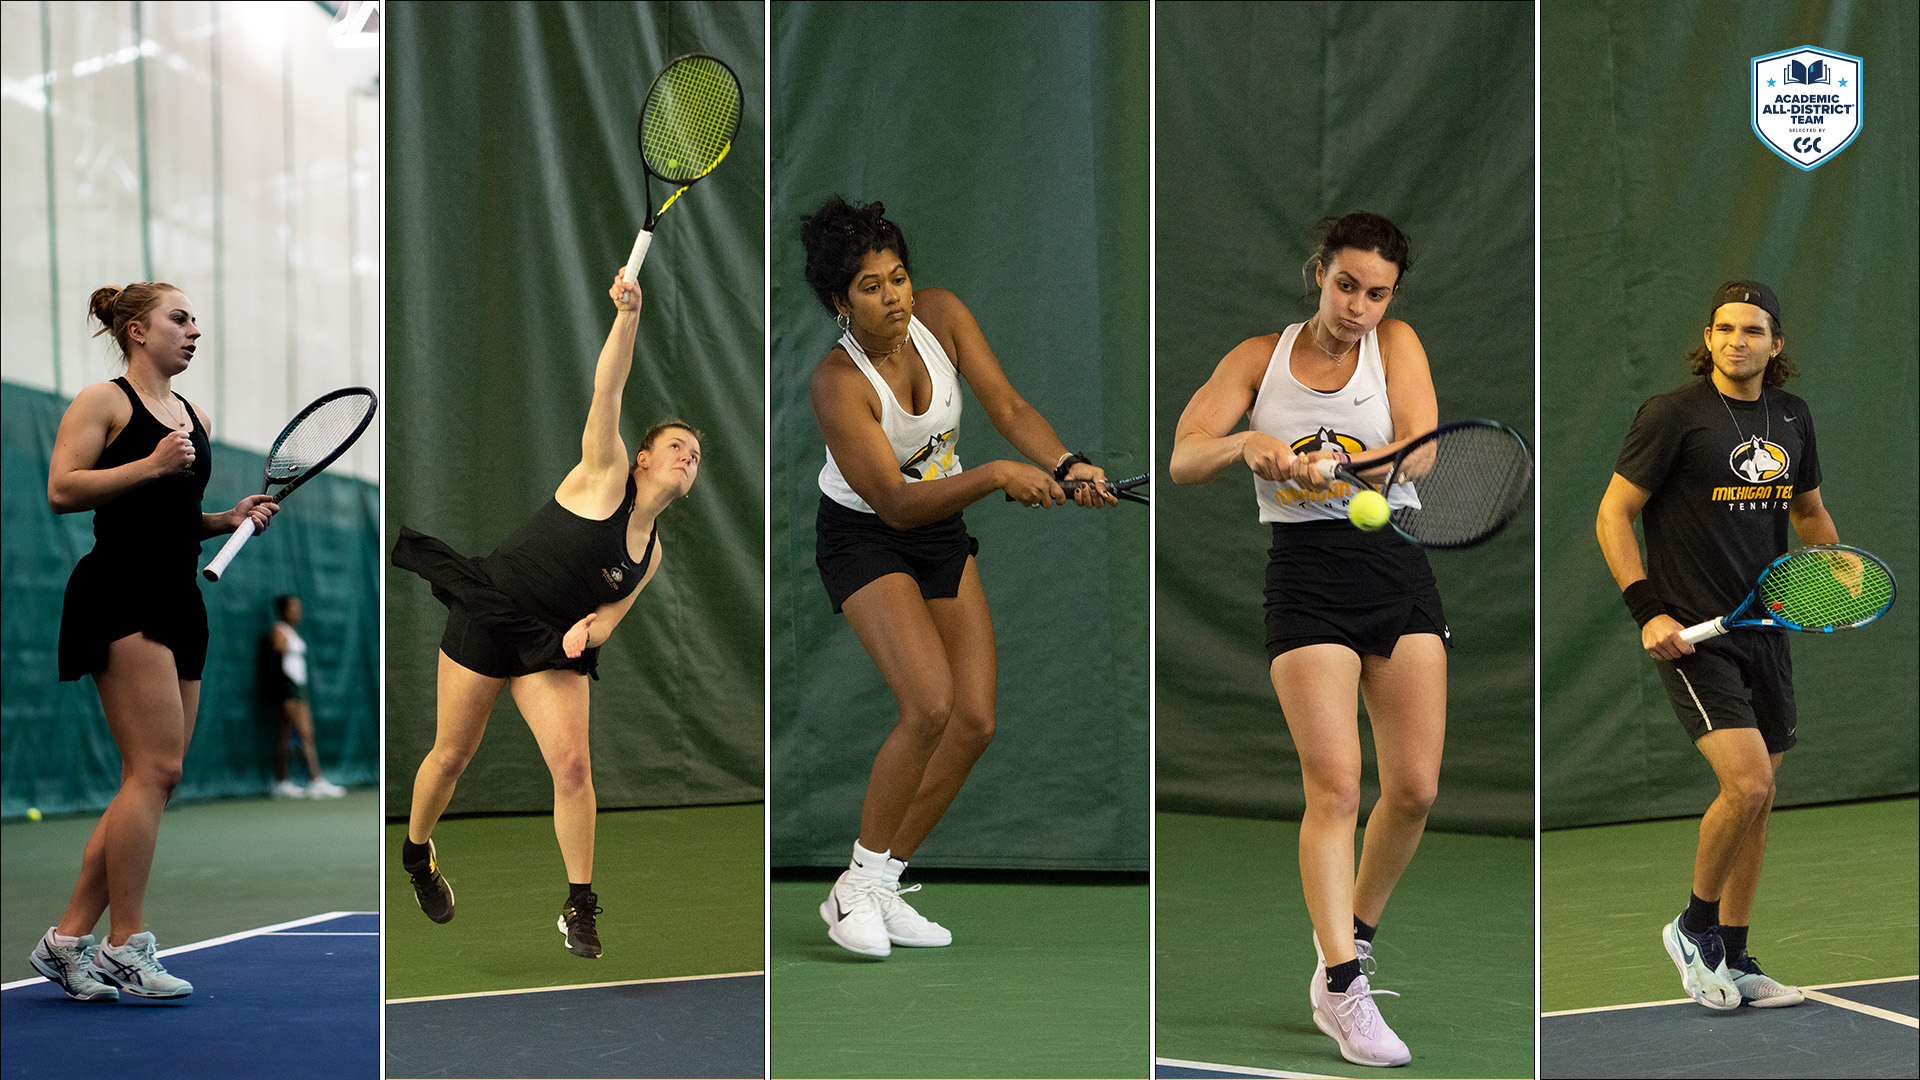 Five Michigan Tech tennis players earn Academic All-District honors